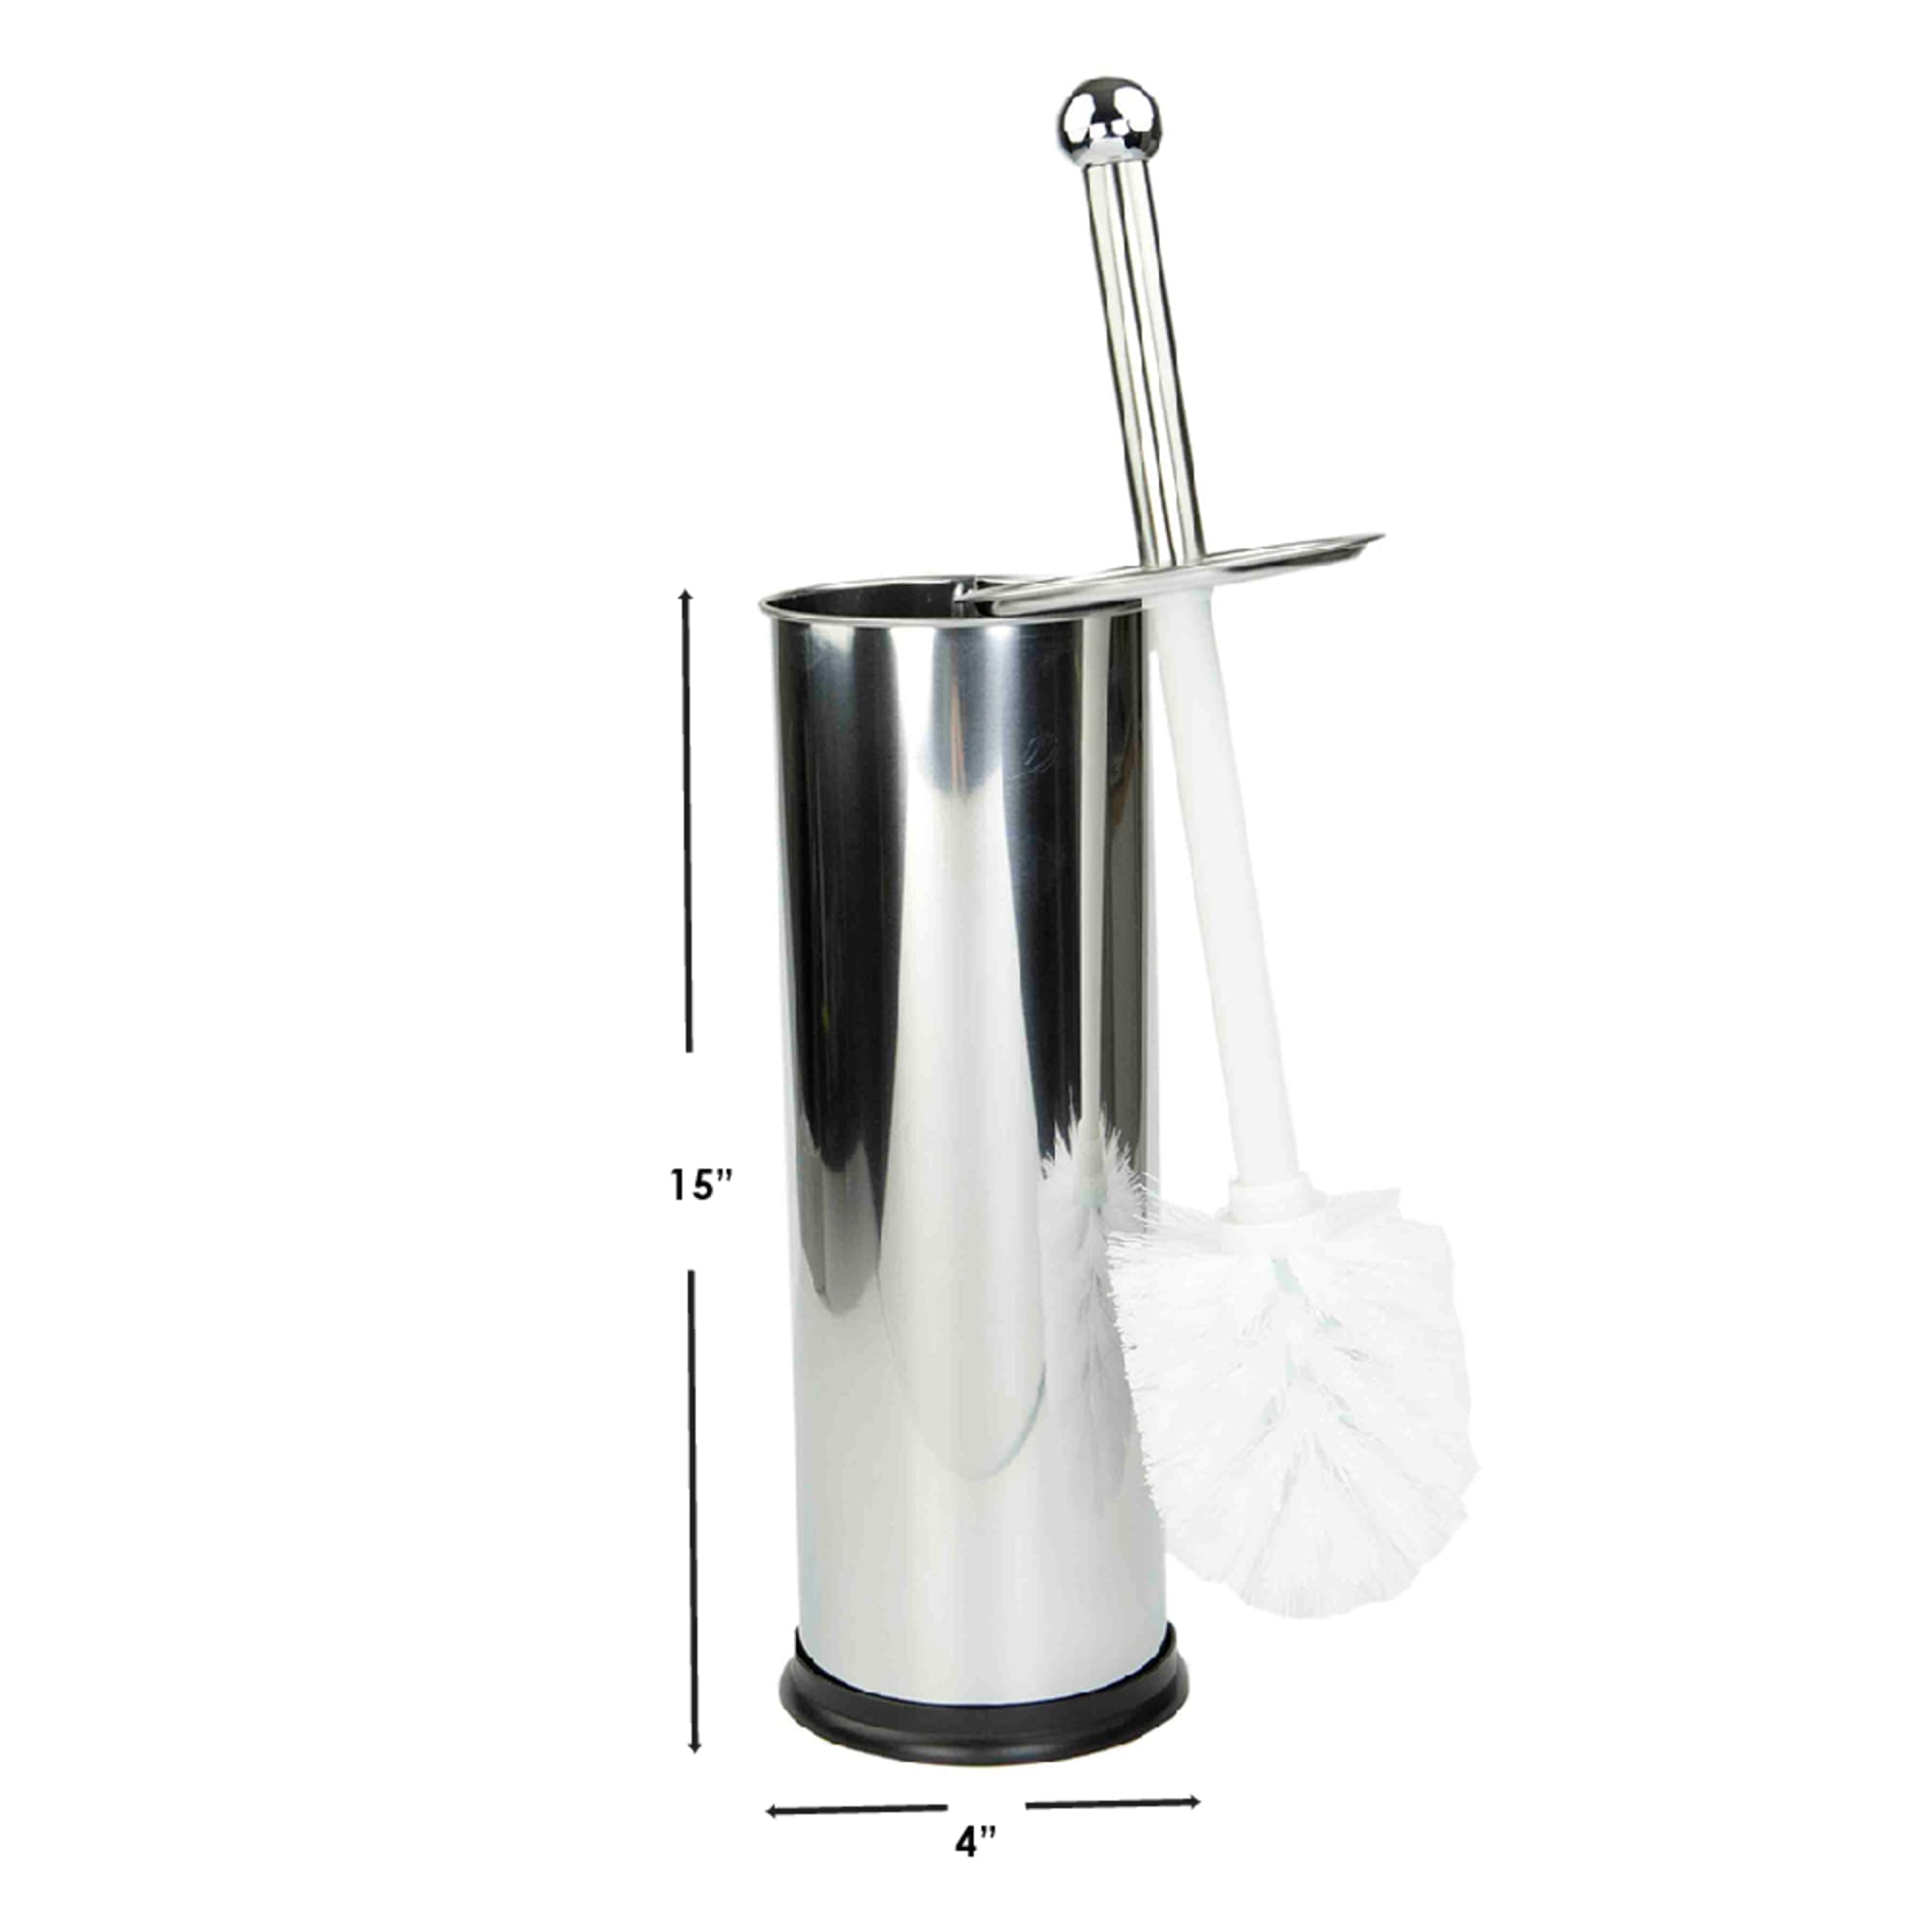 Home Basics Hide-Away and Splash Proof Polished Stainless Steel Toilet Brush with Non-Skid Hygienic Holder, Silver $6.00 EACH, CASE PACK OF 12